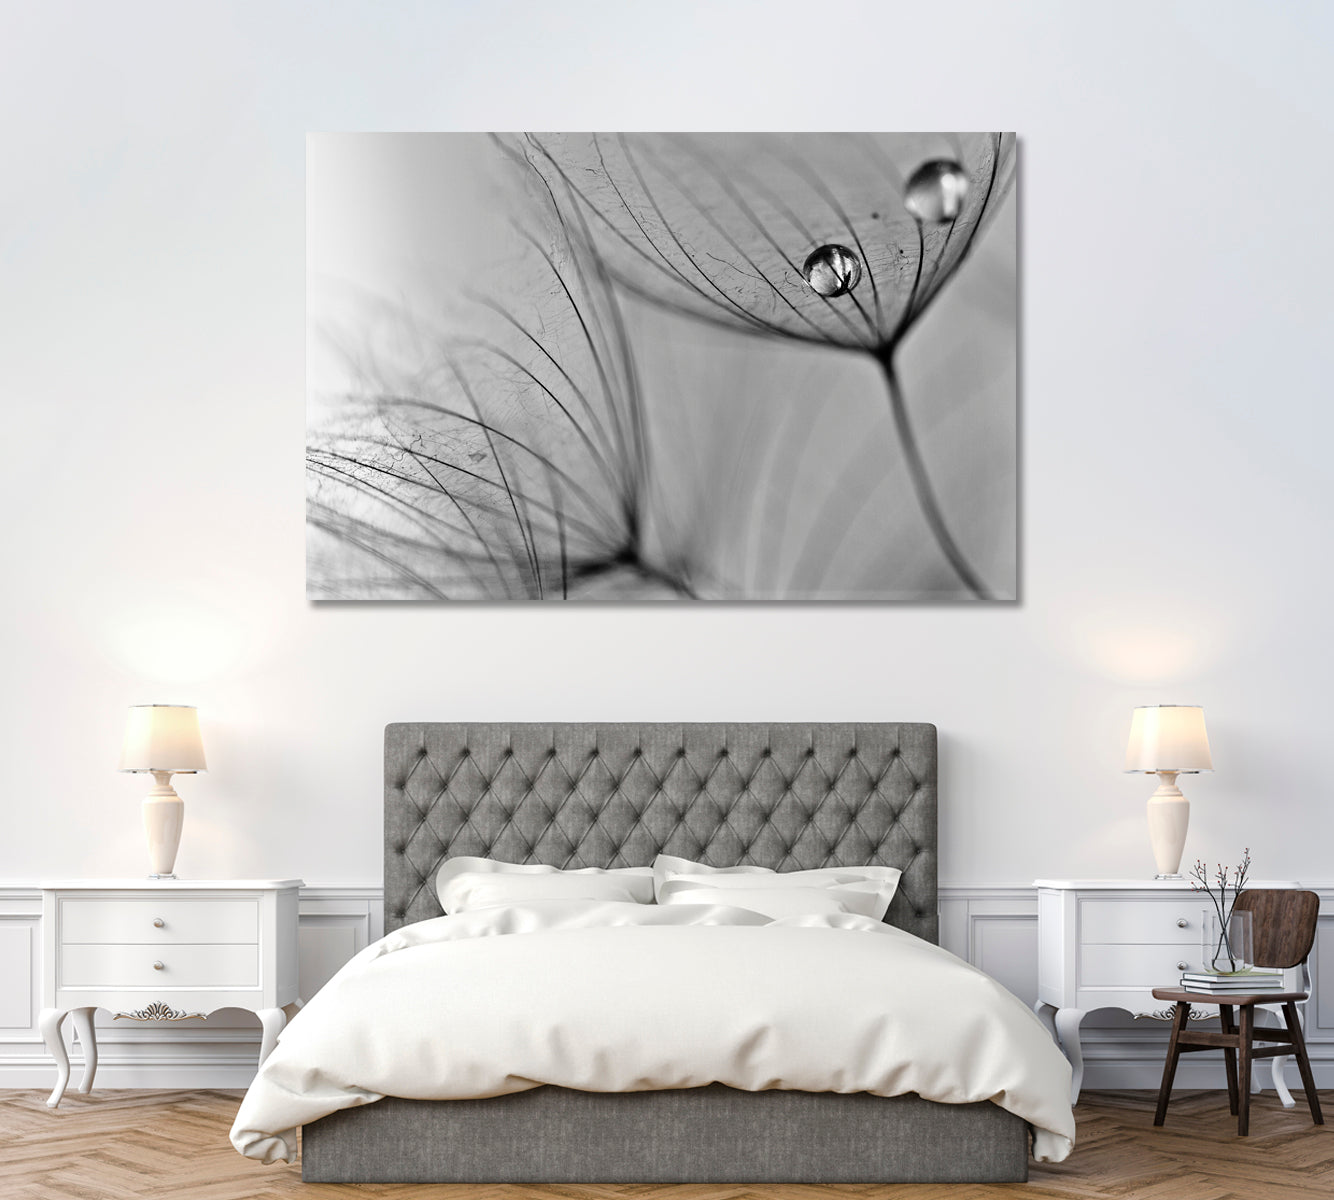 Dandelion with Water Drops Canvas Print ArtLexy 1 Panel 24"x16" inches 